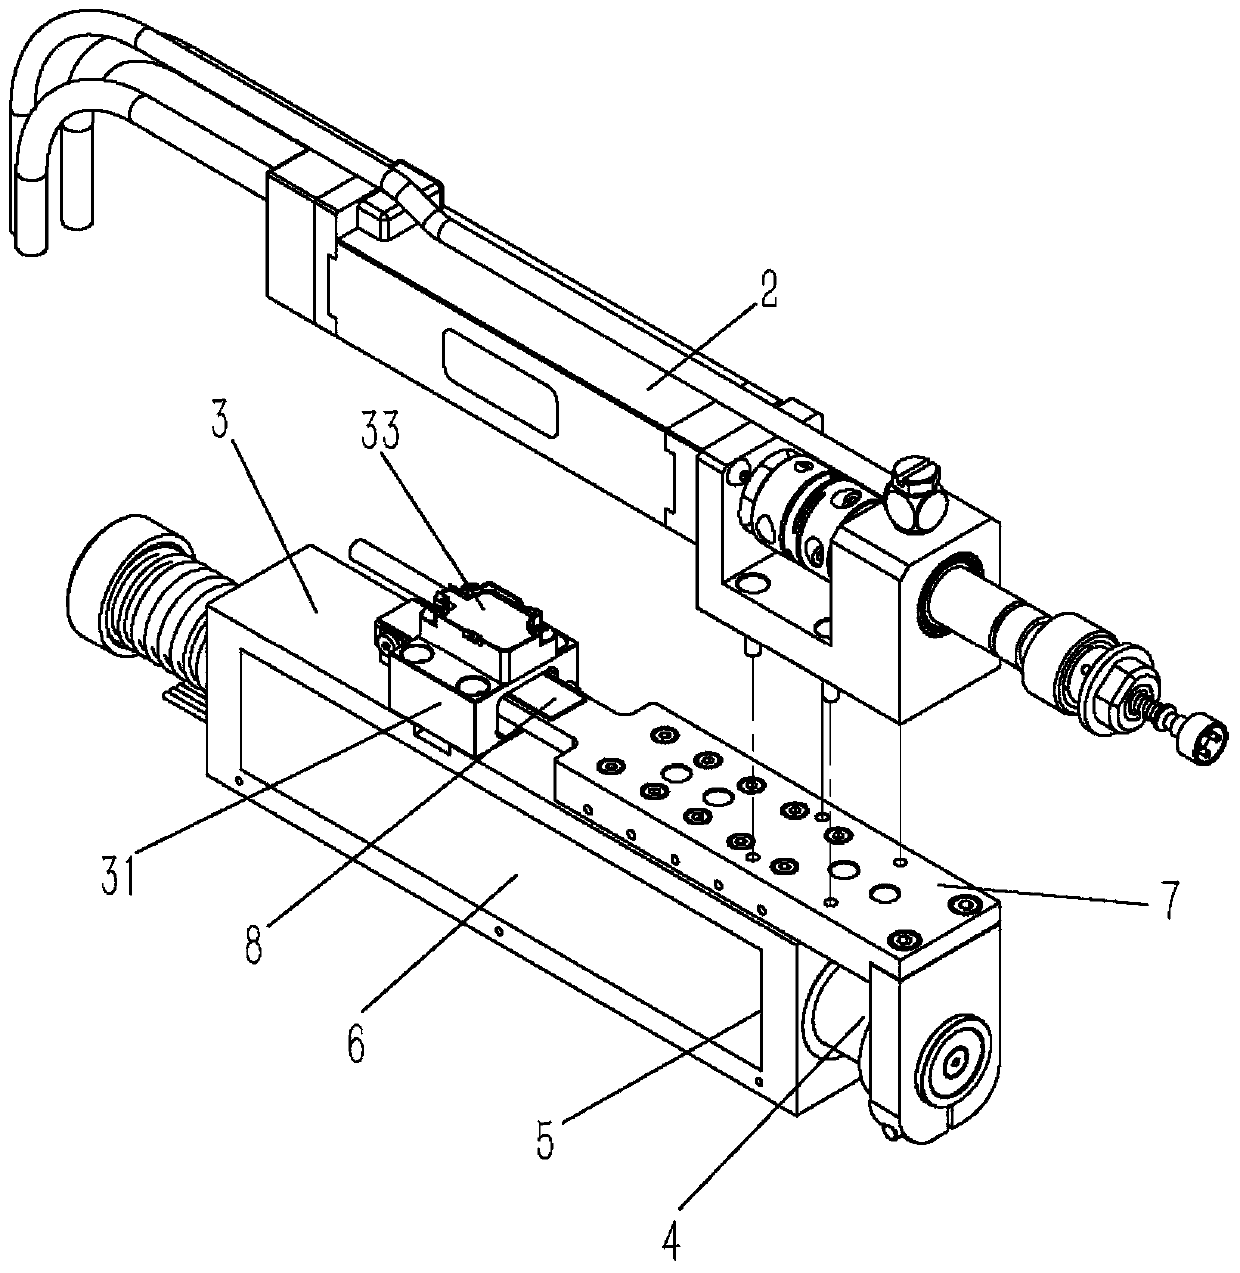 A linear motor module with side opening structure